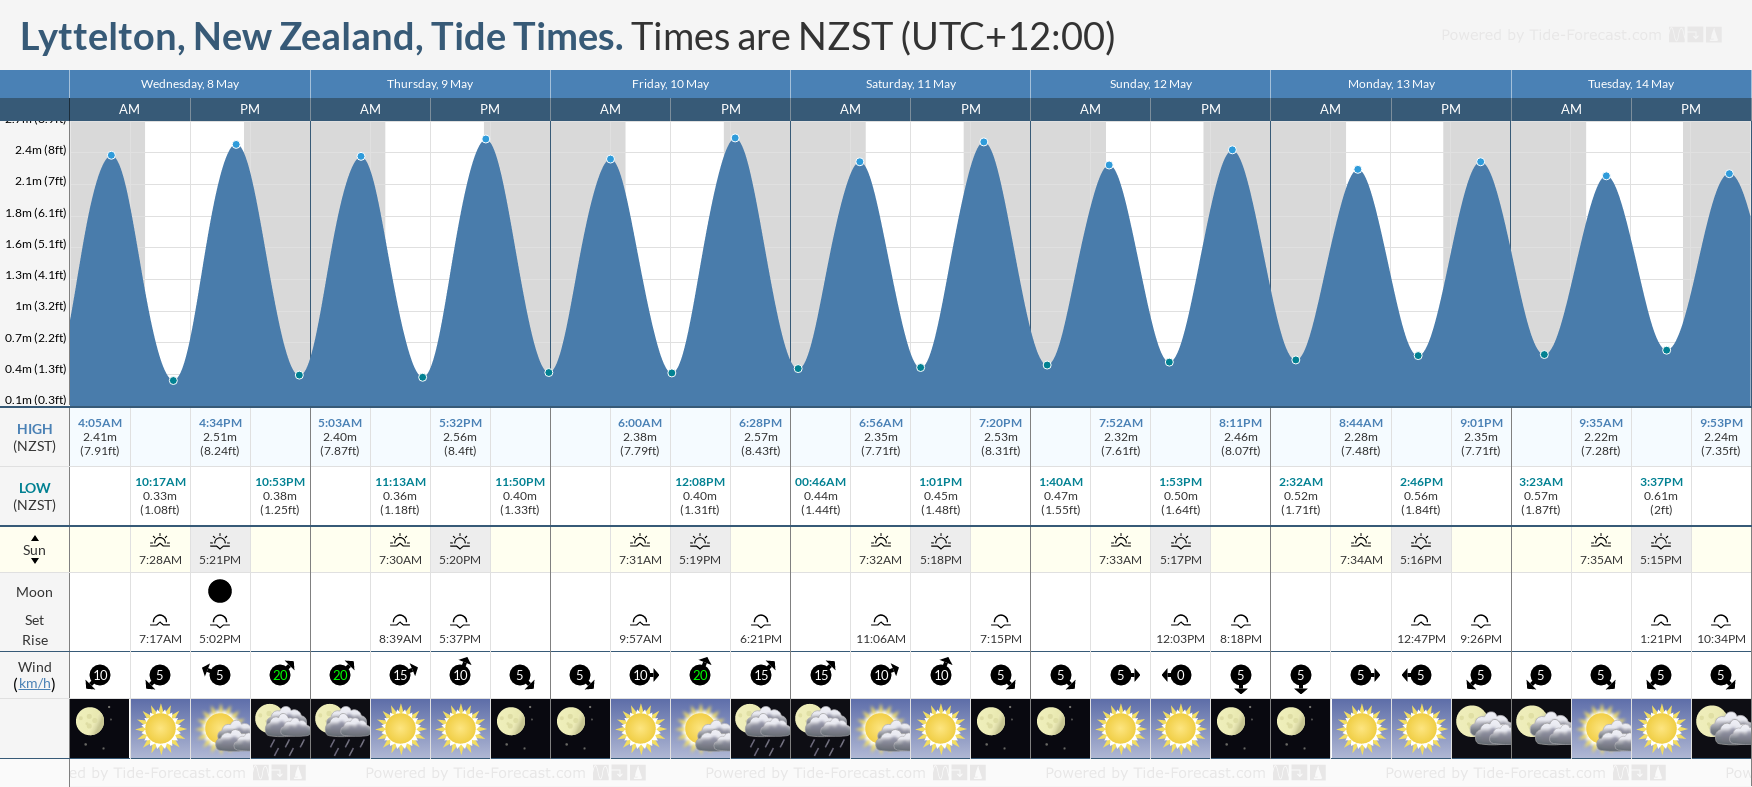 Lyttelton, New Zealand Tide Chart including high and low tide tide times for the next 7 days